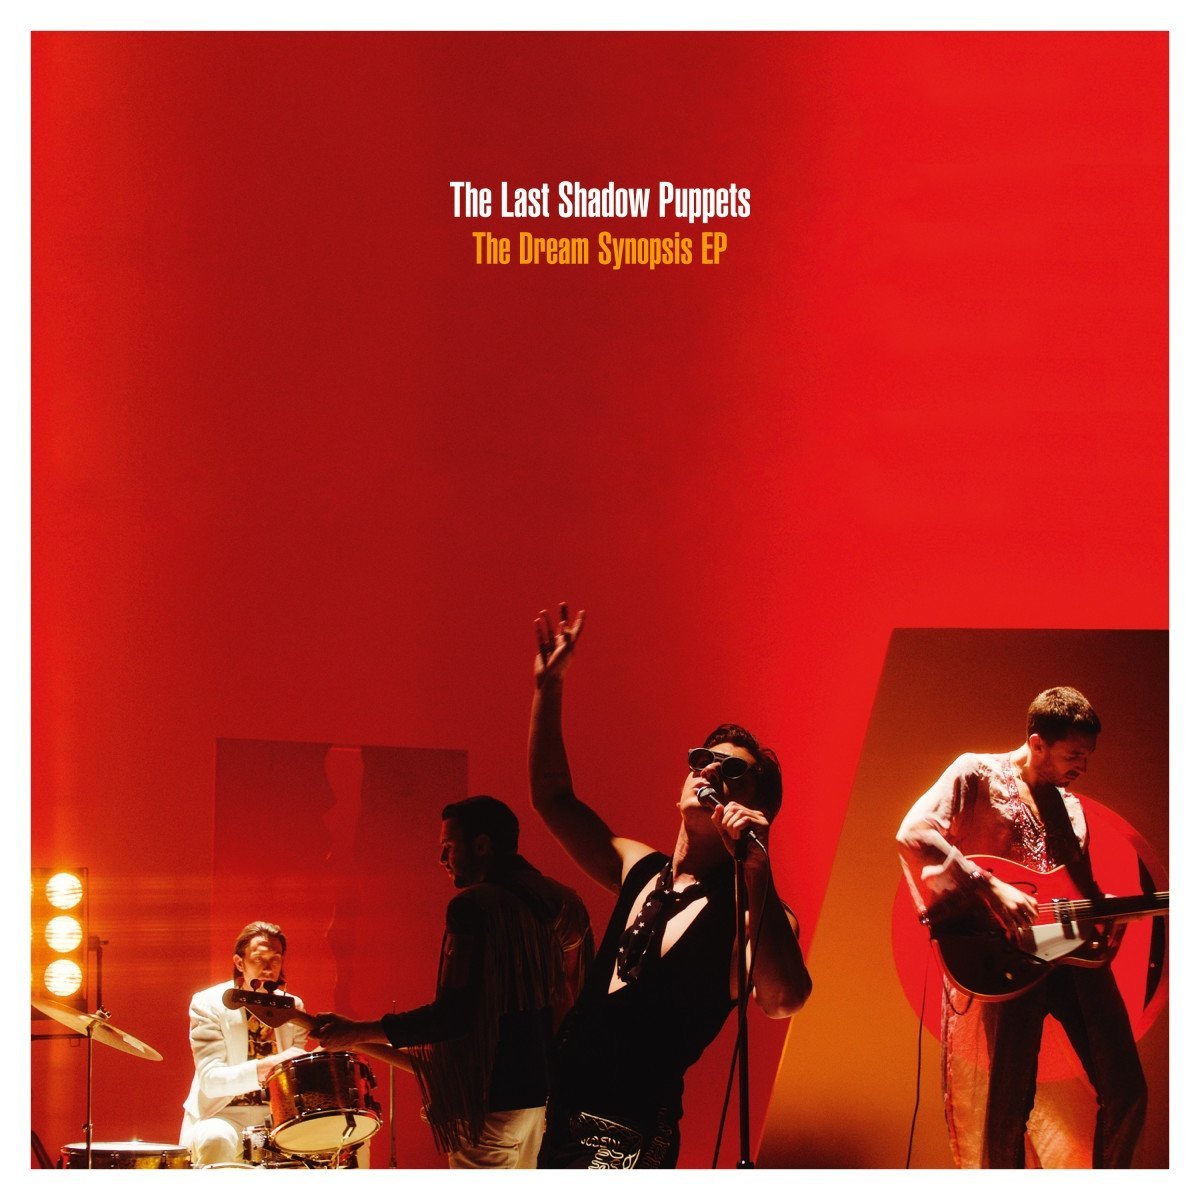 The Dream Synopsis EP - Vinyl | The Last Shadow Puppets